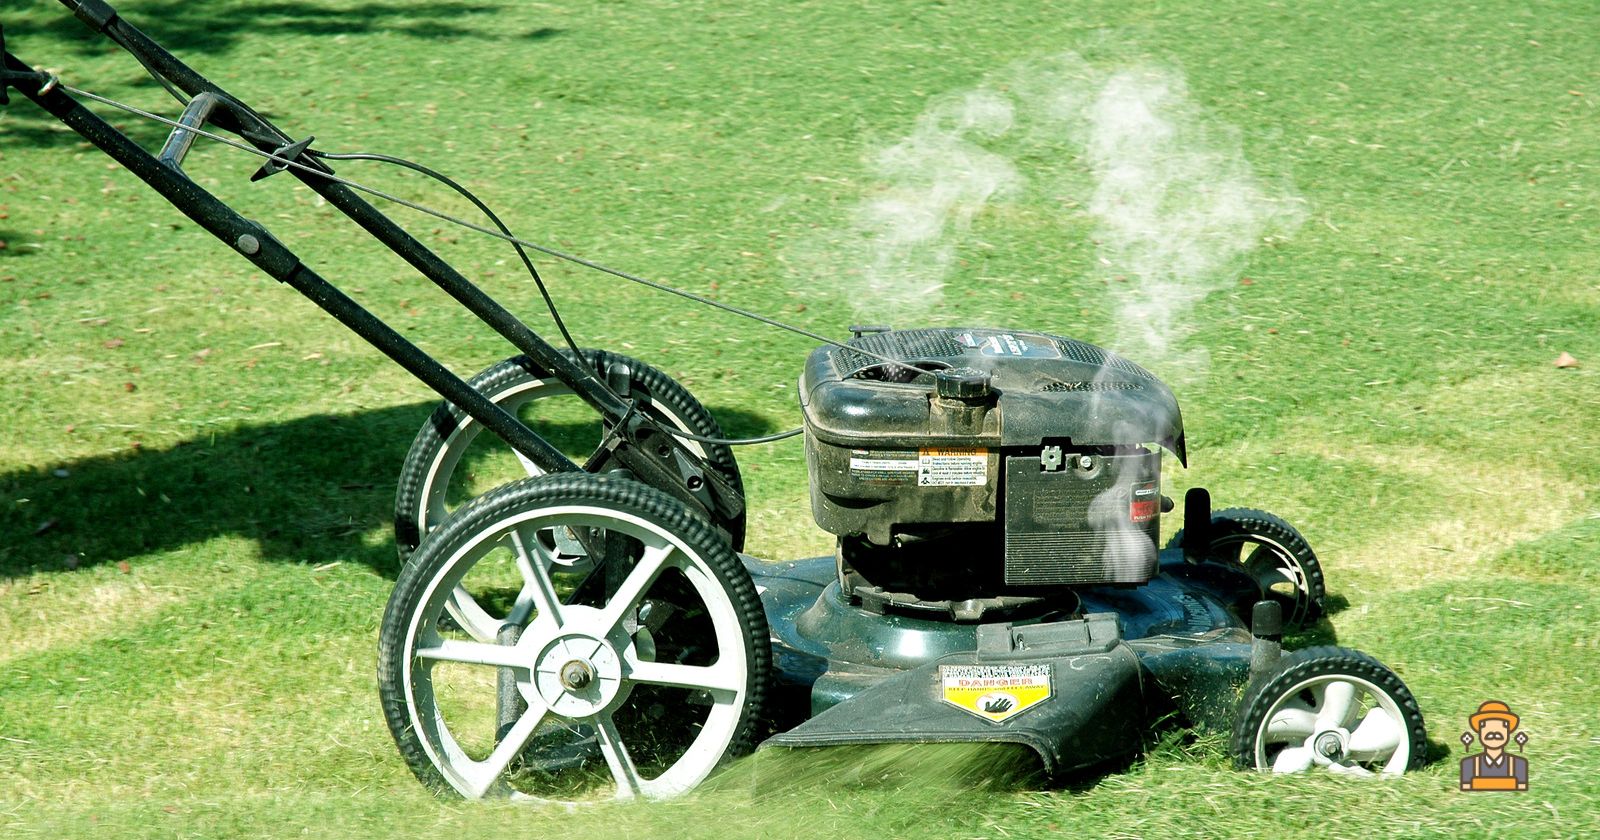 Why Is My Lawn Mower Smoking